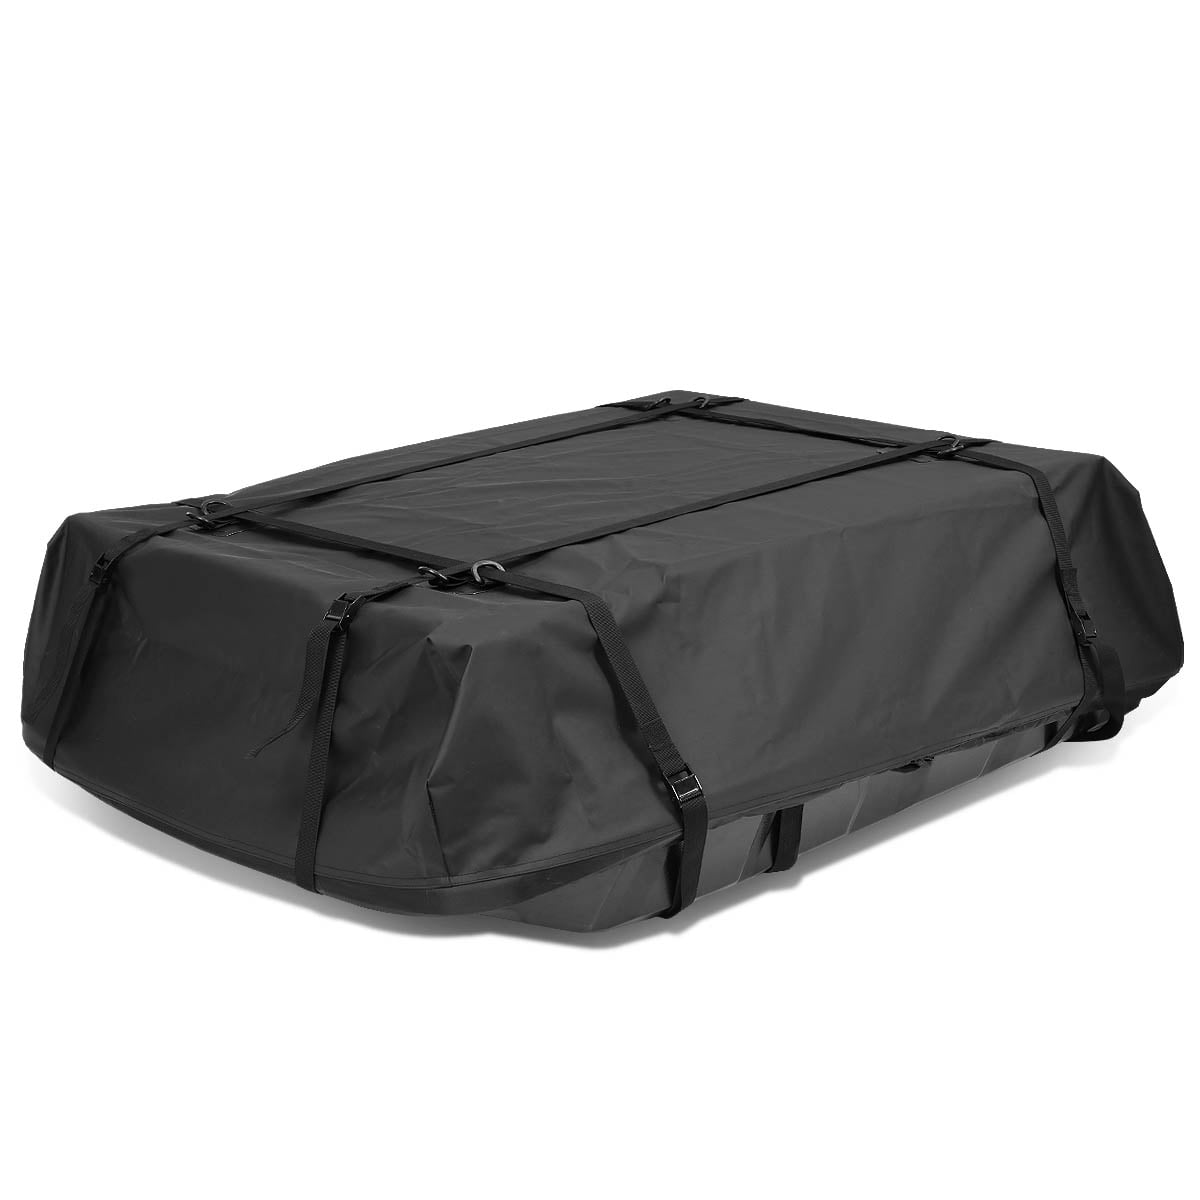 G4Free 15.5 Cubic Feet Waterproof Car Top Carrier Easy to Install Soft Roof Bag Cargo Bag with Wide Straps-Works with or Without Roof Rack G4Garden